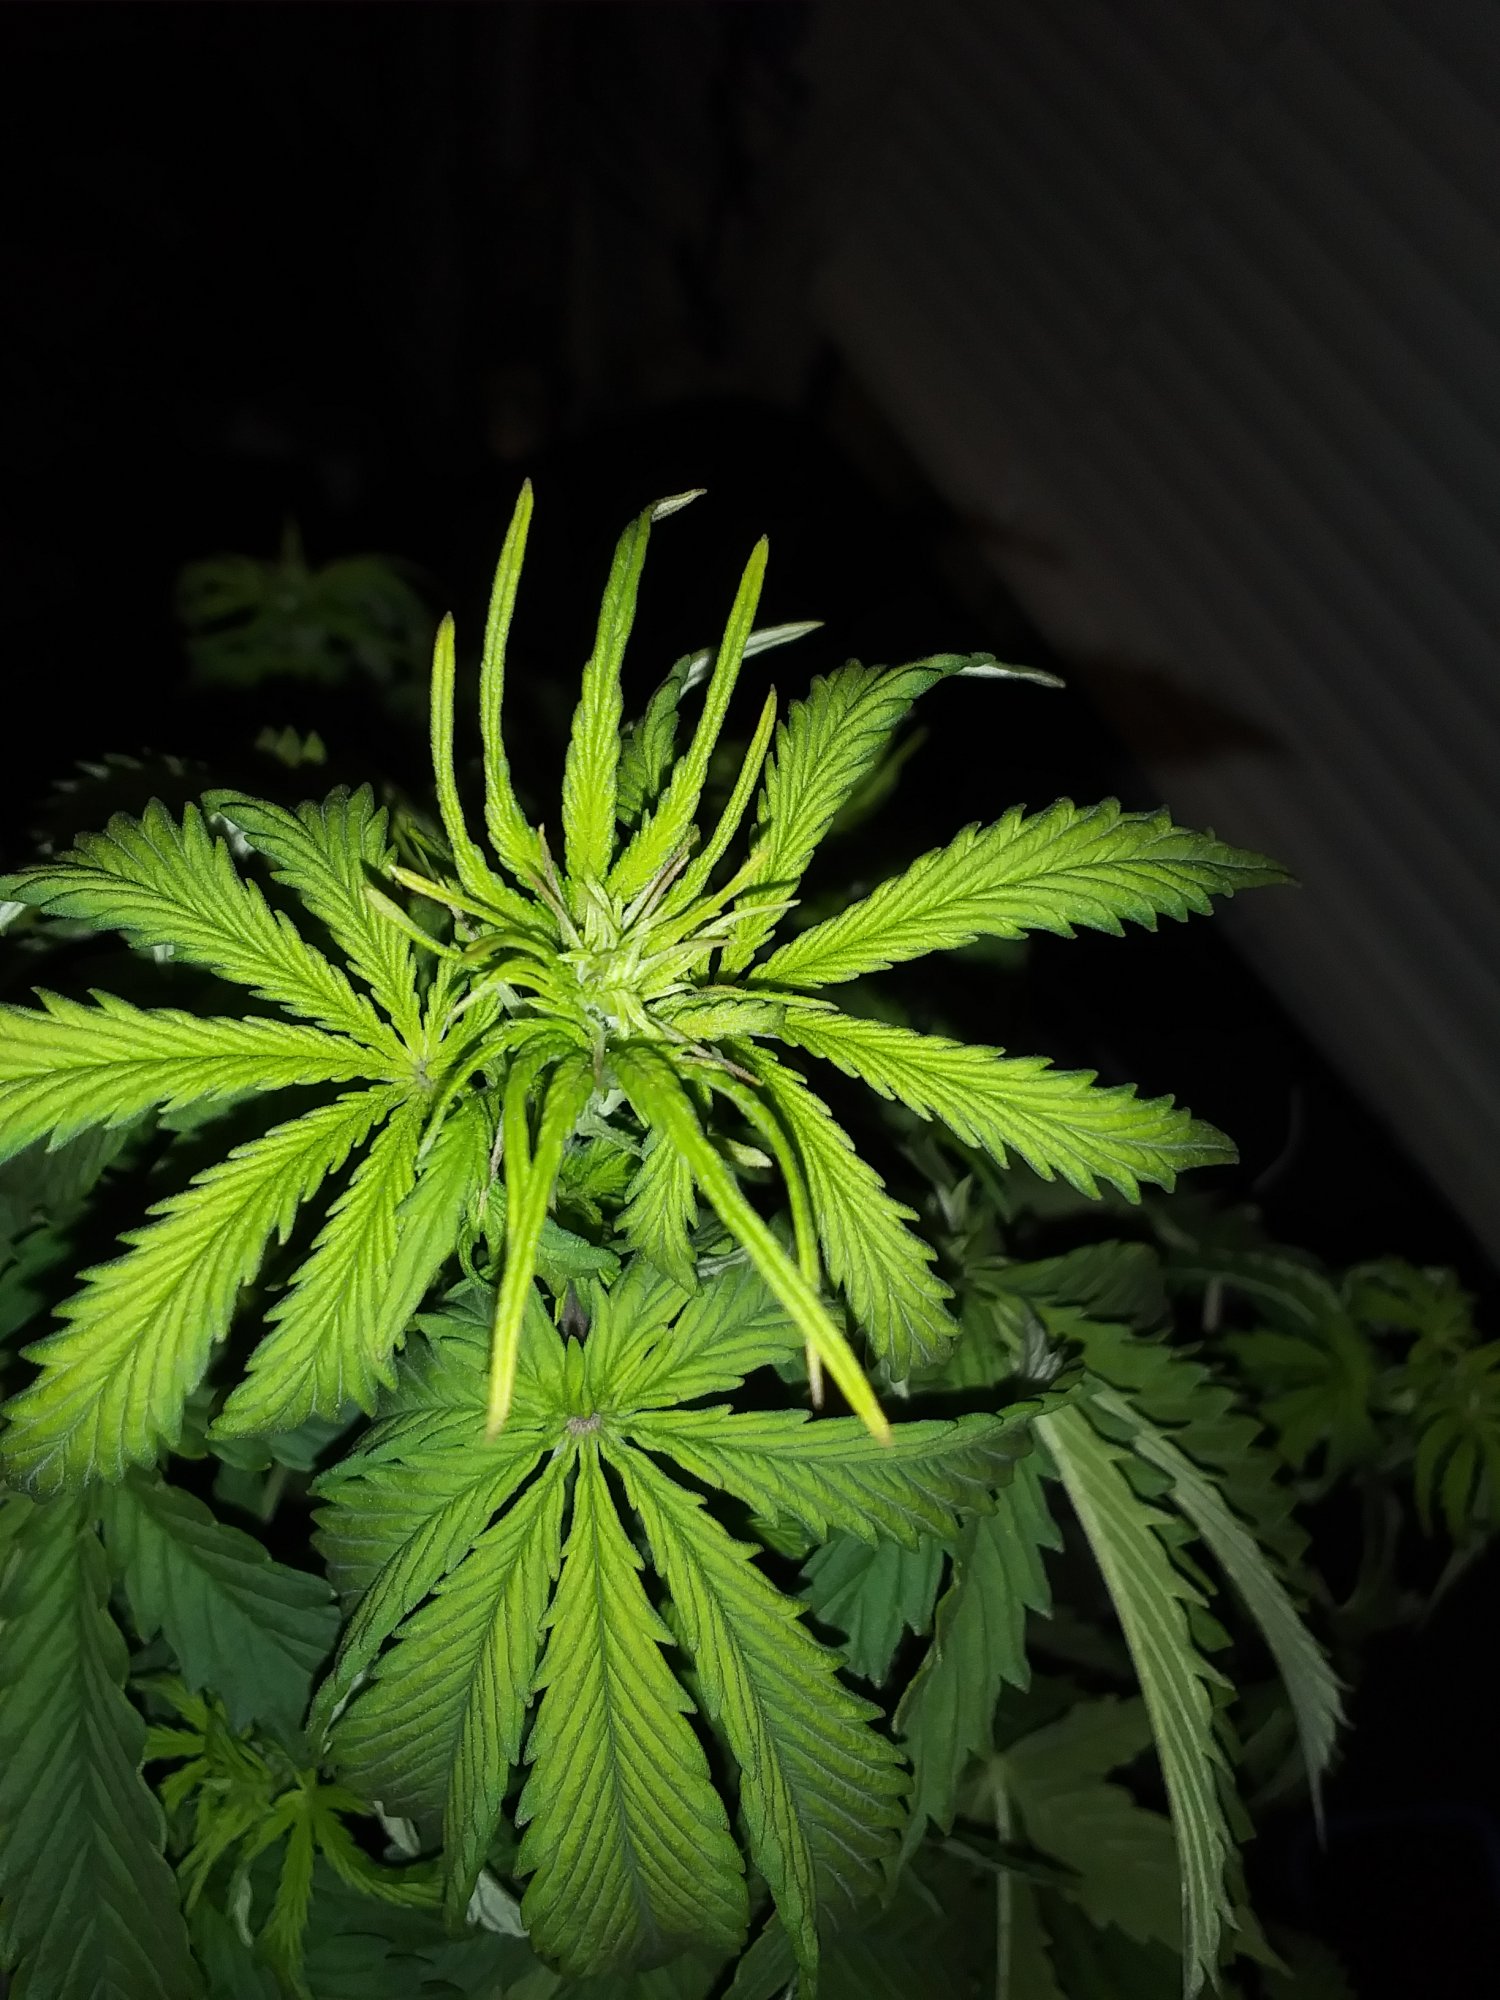 Whats wrong with my pineapple autoflower 3